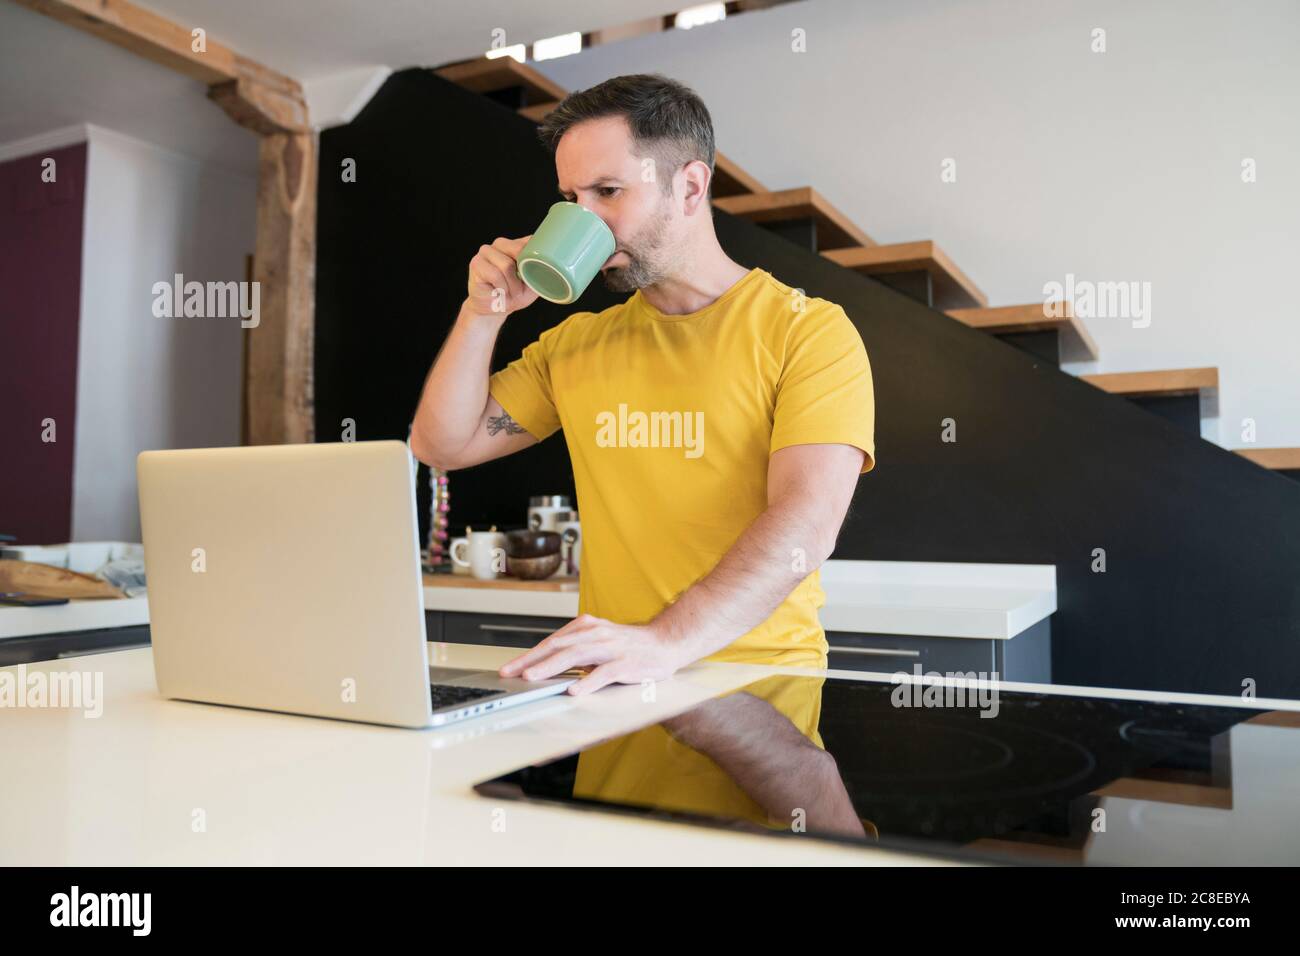 Man drinking coffee while using laptop on kitchen island at home Stock Photo